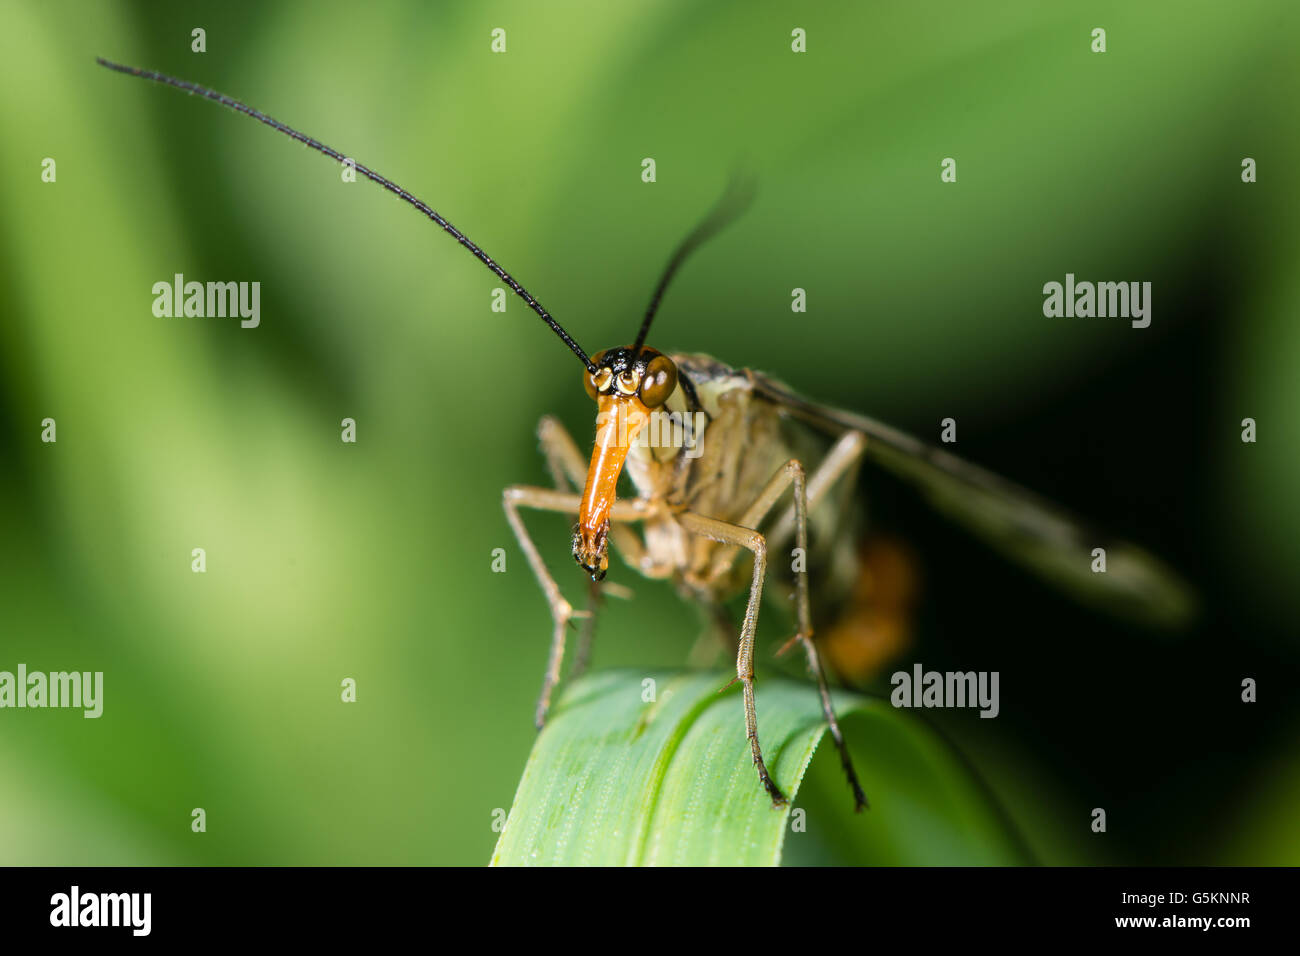 Head of scorpionfly (Panorpa species). Elongate mandibles and fleshy palps forming mouthparts of insect in Order Mecoptera Stock Photo